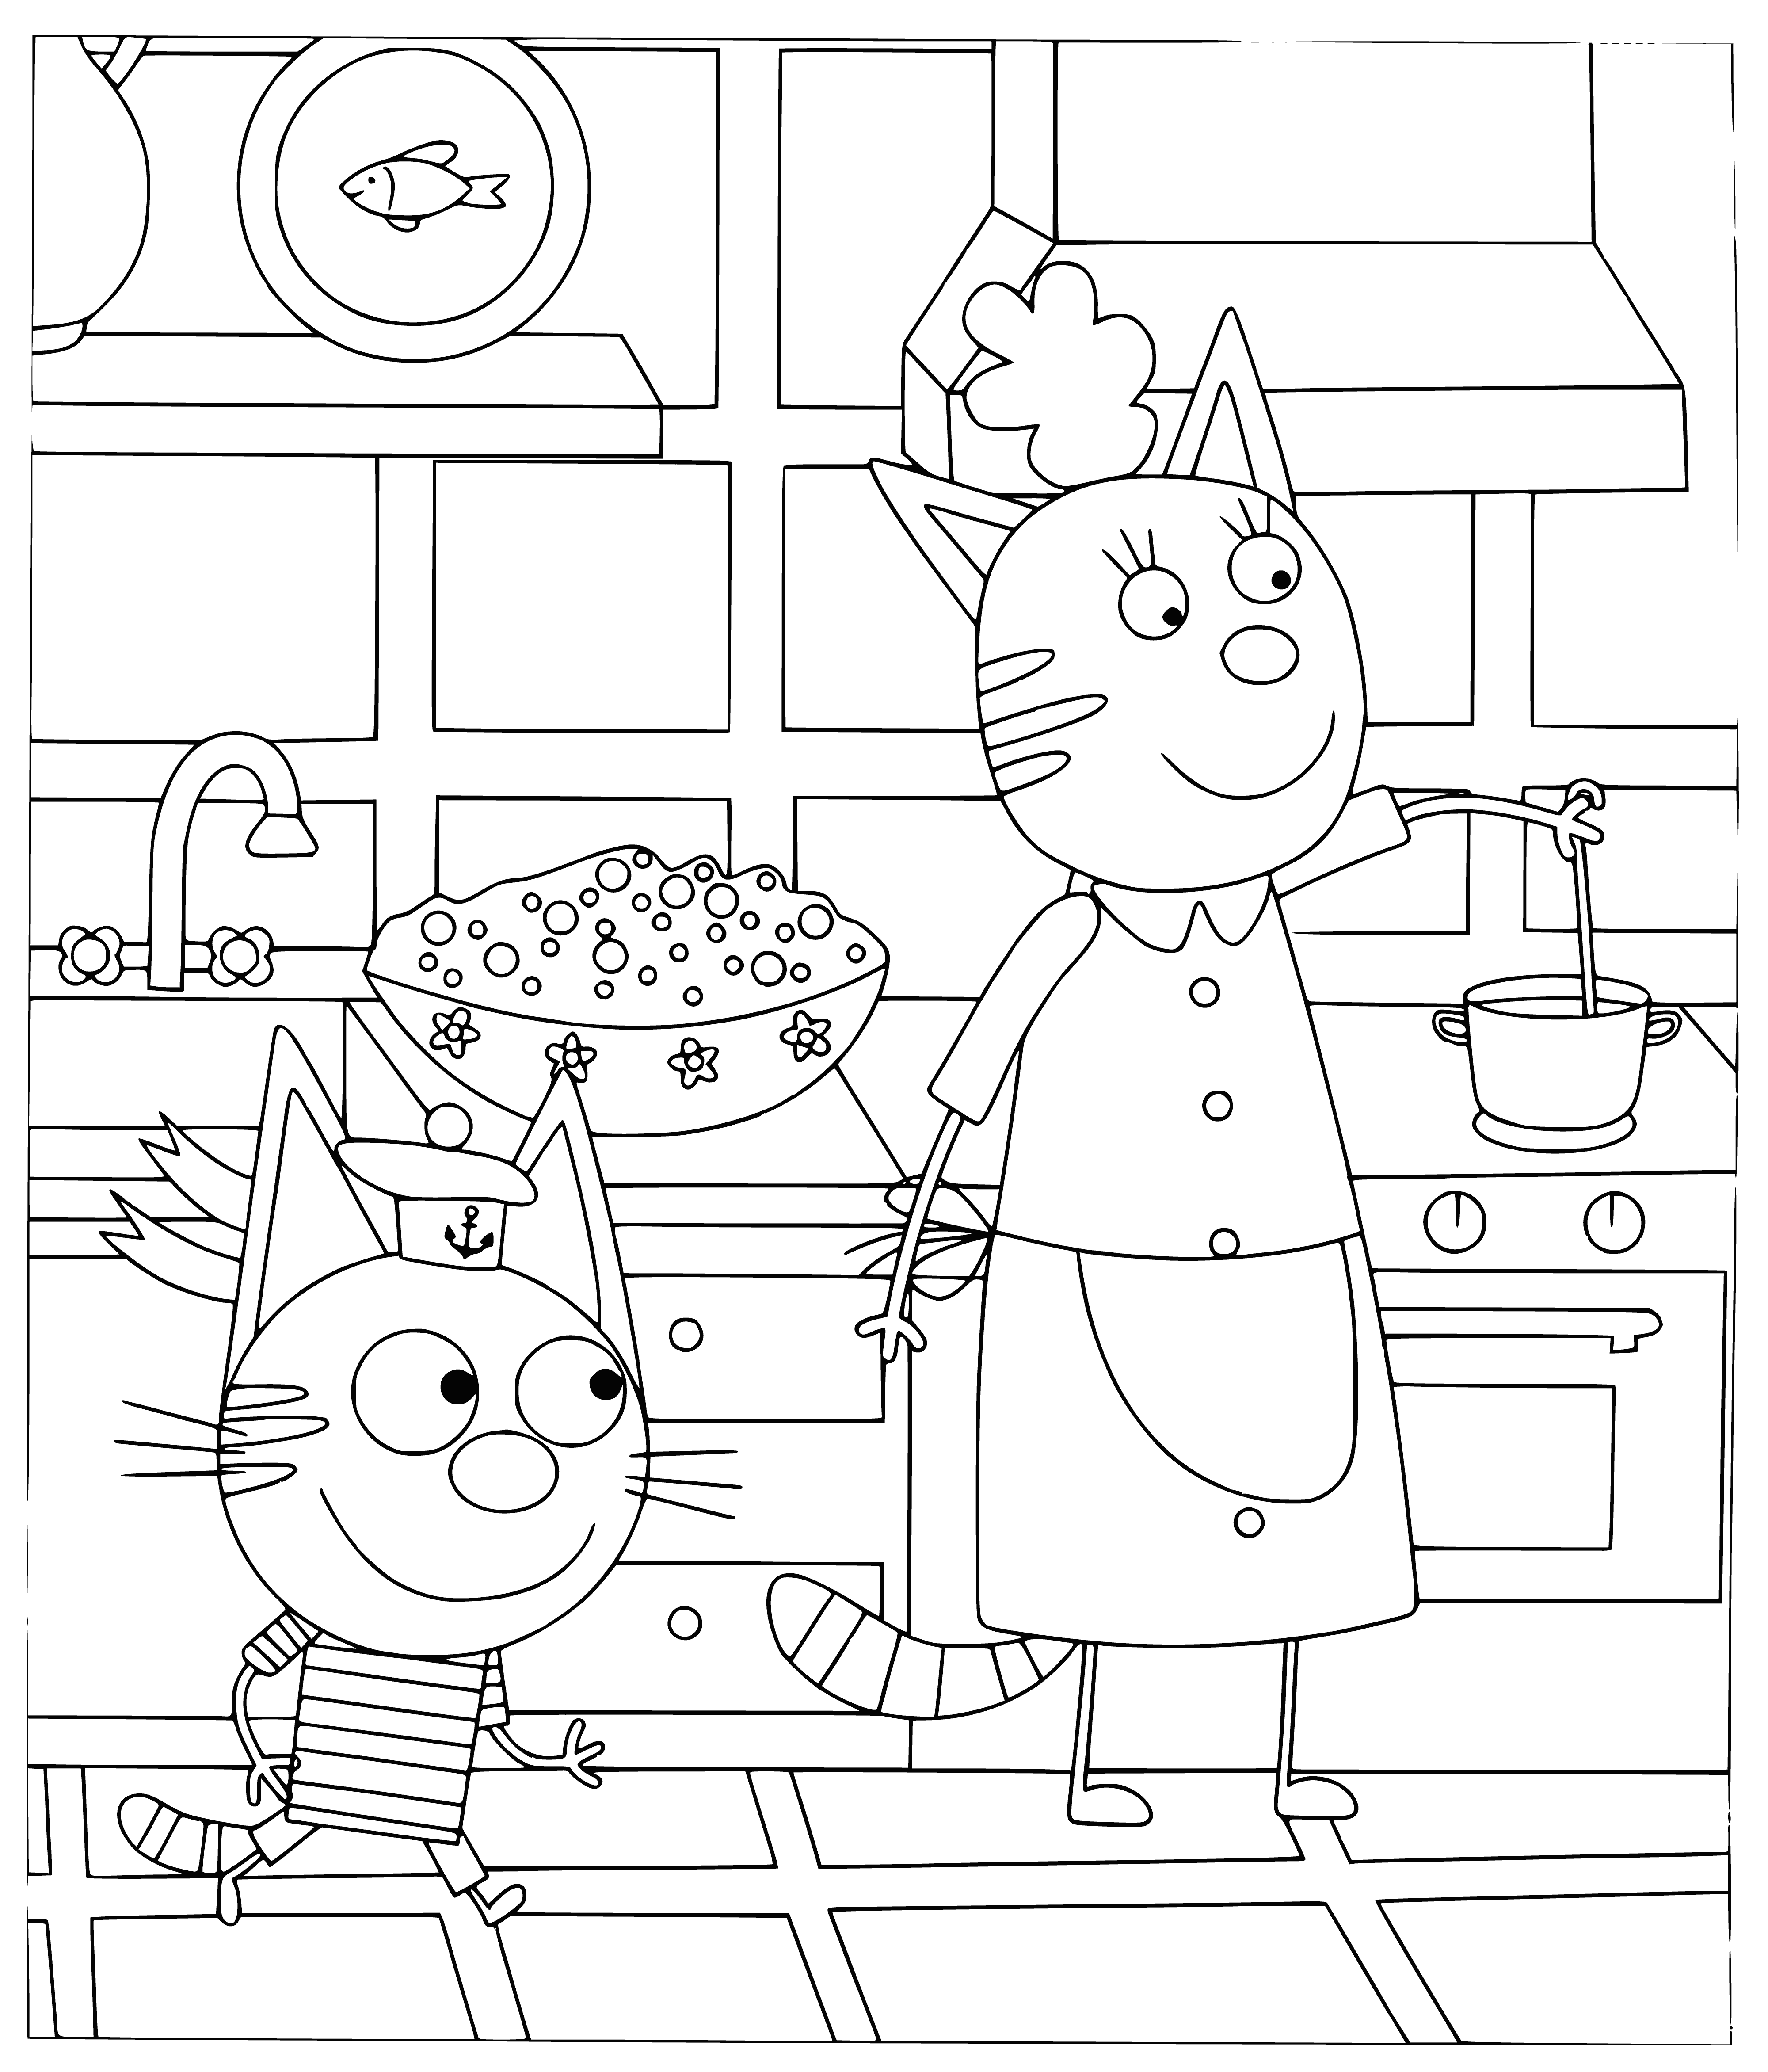 coloring page: 3 cats: 1 black&white on counter, 2 orange&white on floor looking & eating from separate bowls of food.